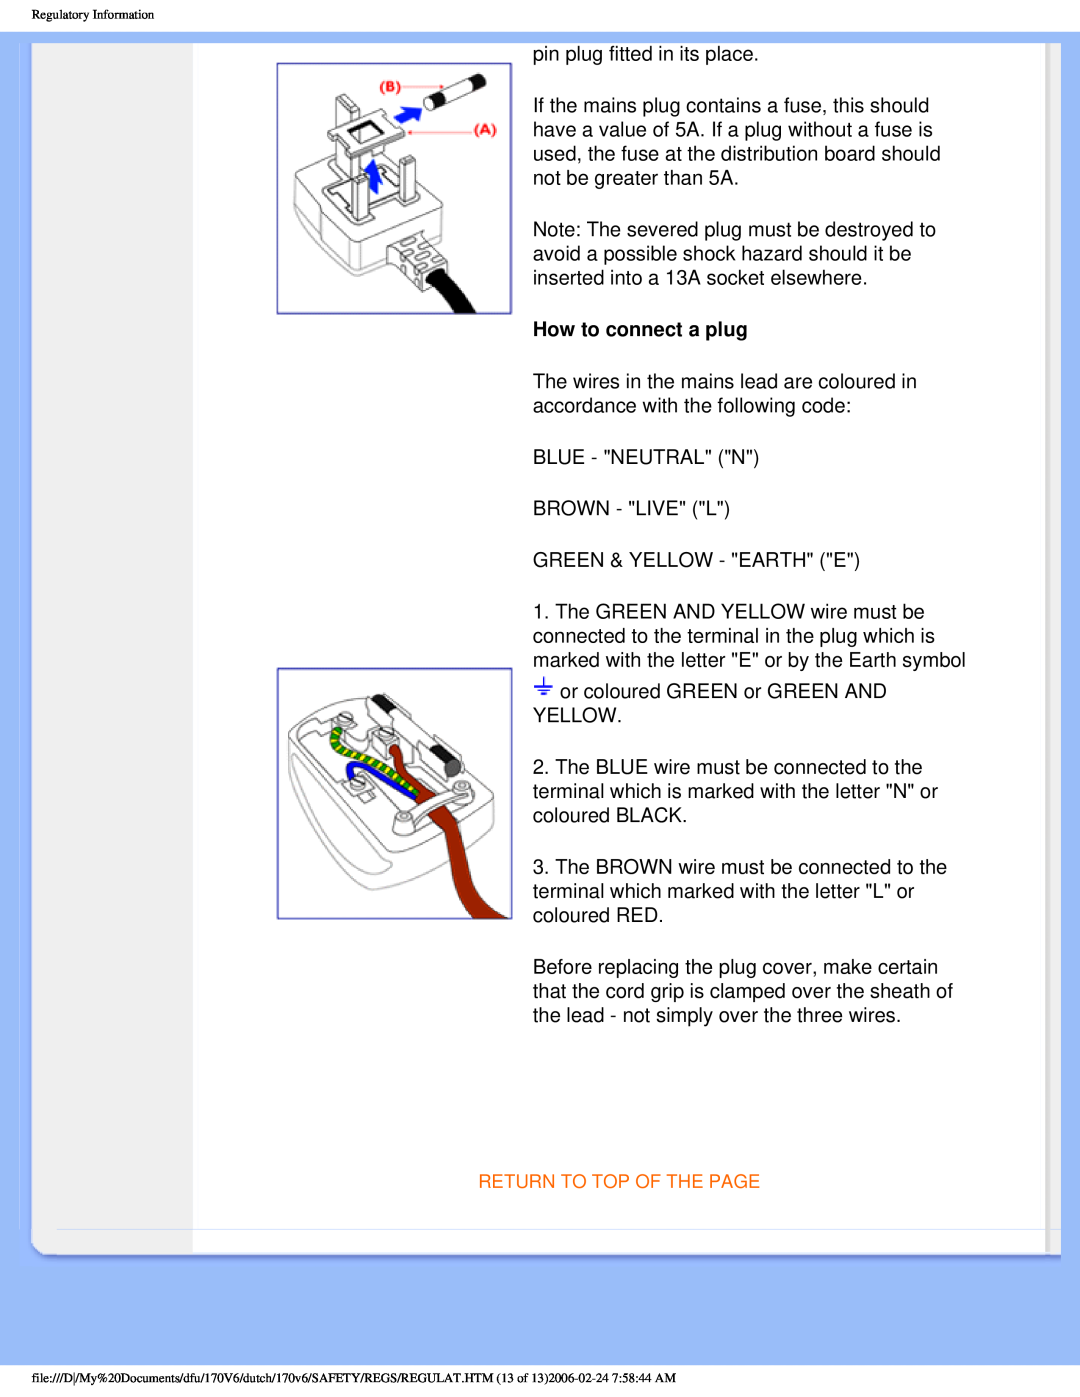 Philips 170V6 user manual How to connect a plug 